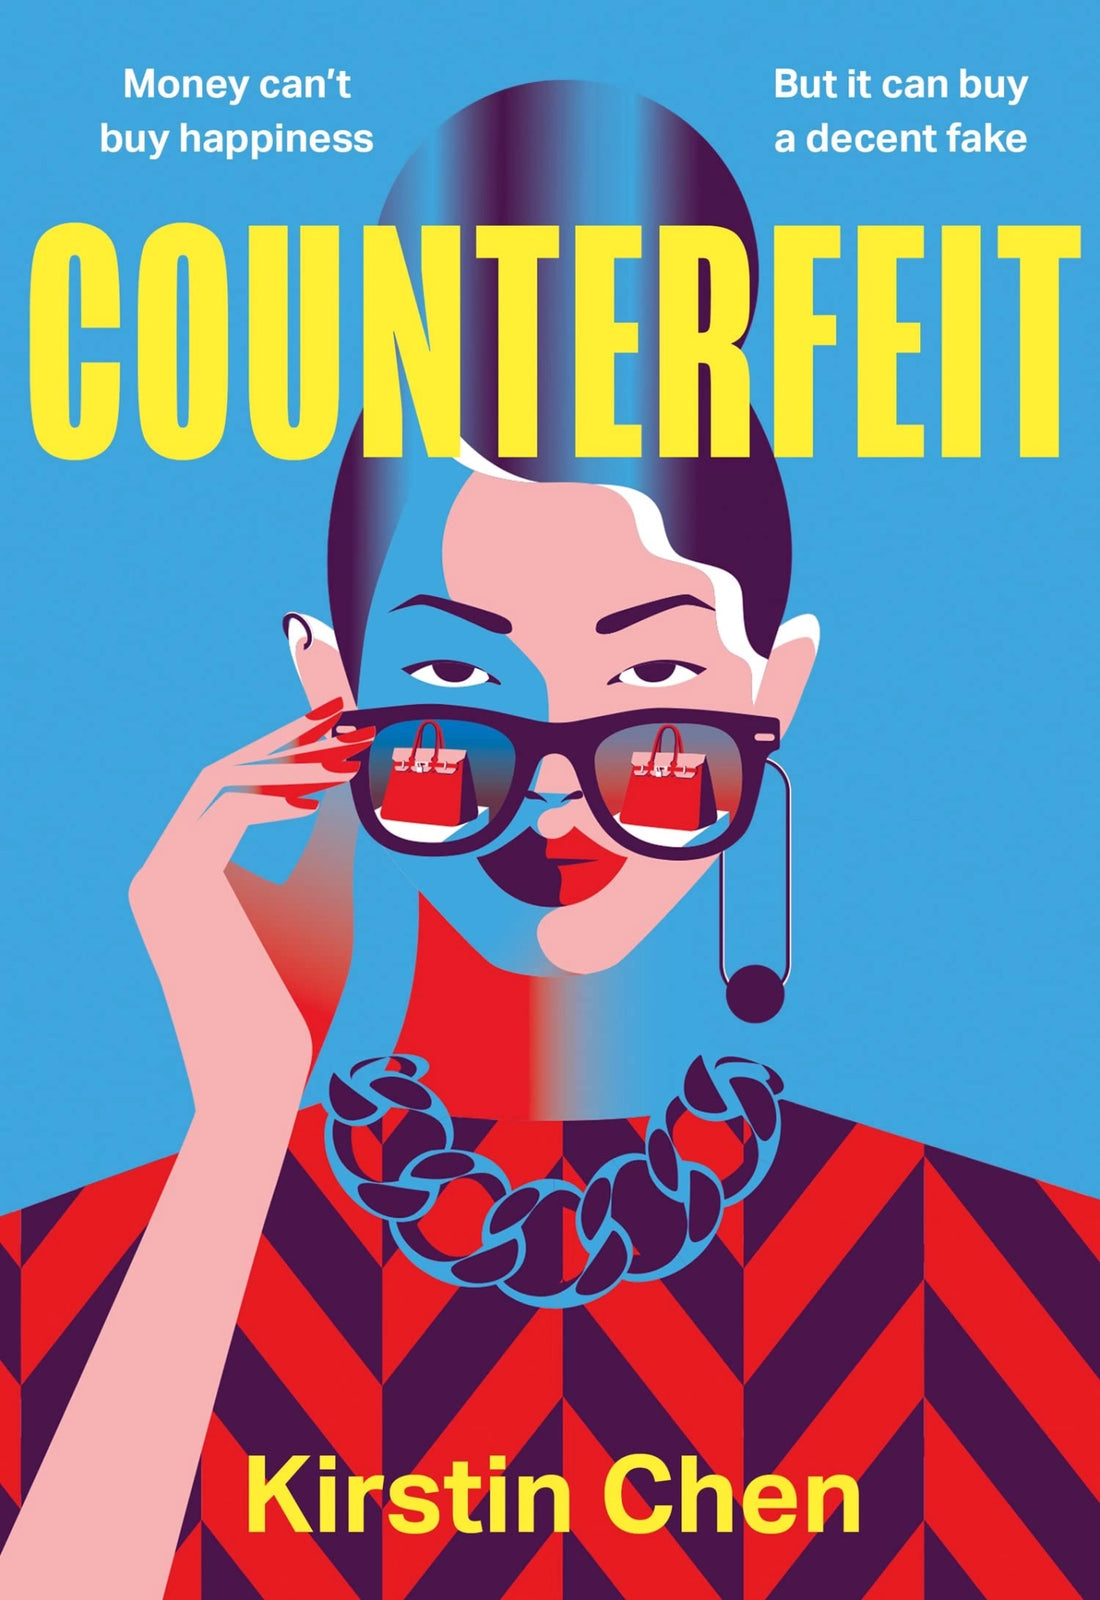 Book Club Penguins - Book 11 Membership: The Counterfeit by Kirstin Chen